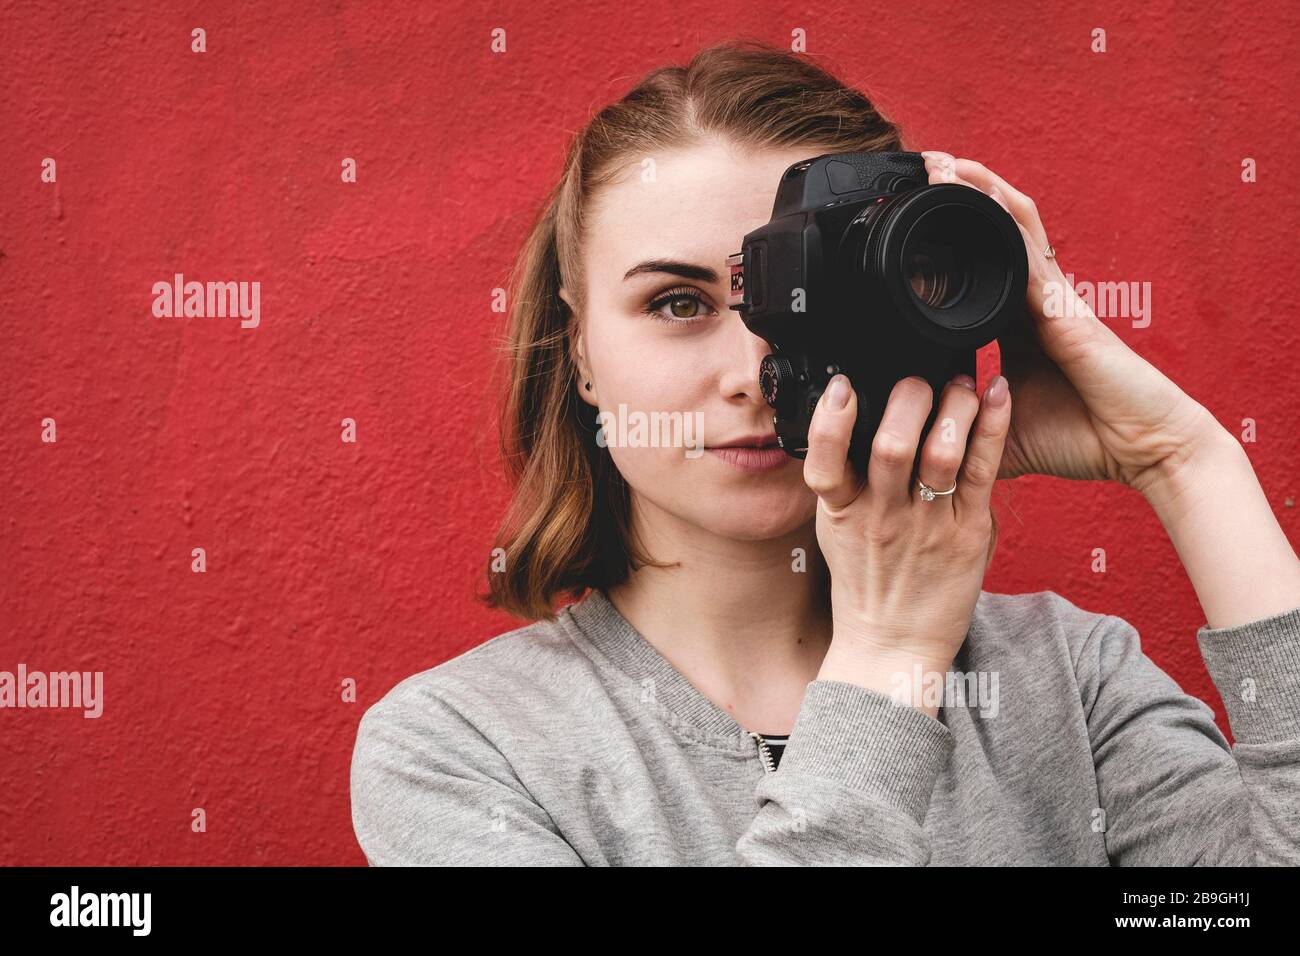 Female photographer holding a camera in portrait Stock Photo